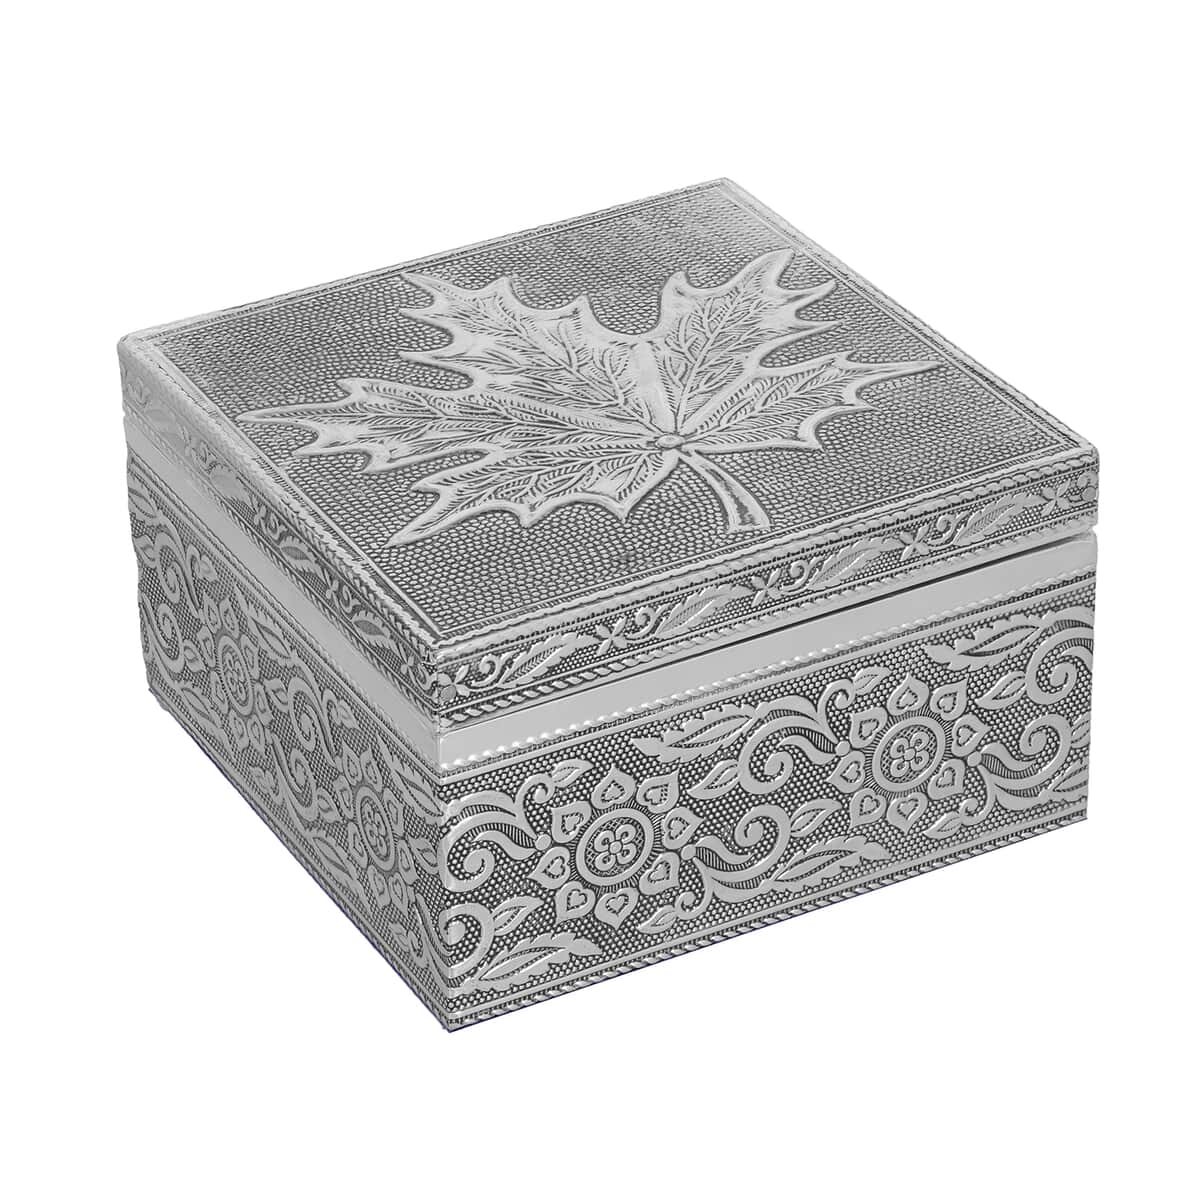 Set of 3 Handcrafted Maple Leafs Embossed Aluminum Oxidized Multi-Purpose Nested Box with Scratch Protection Interior (5,3.5,2.5 in) image number 4